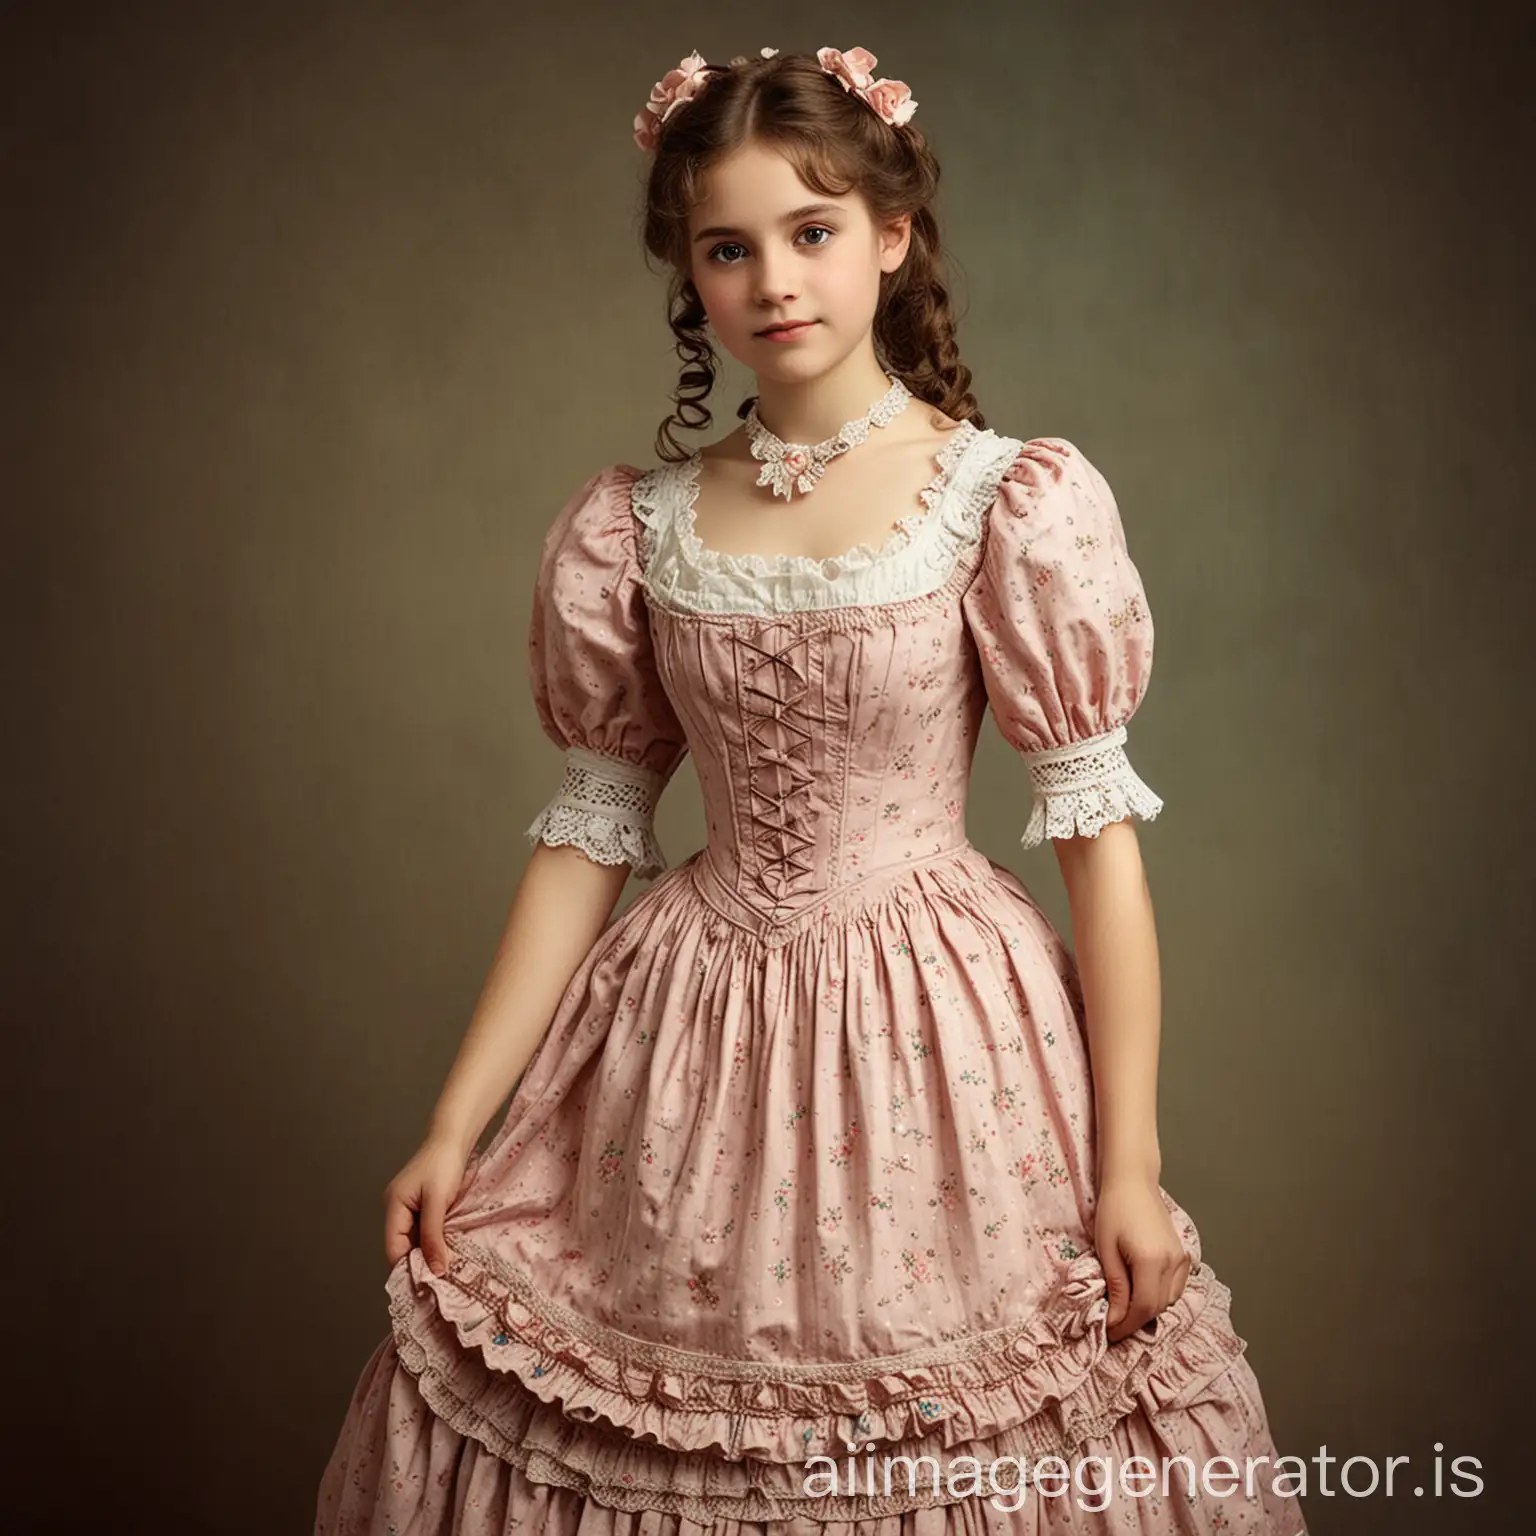 Beautiful Victorian girl with a cute dress.